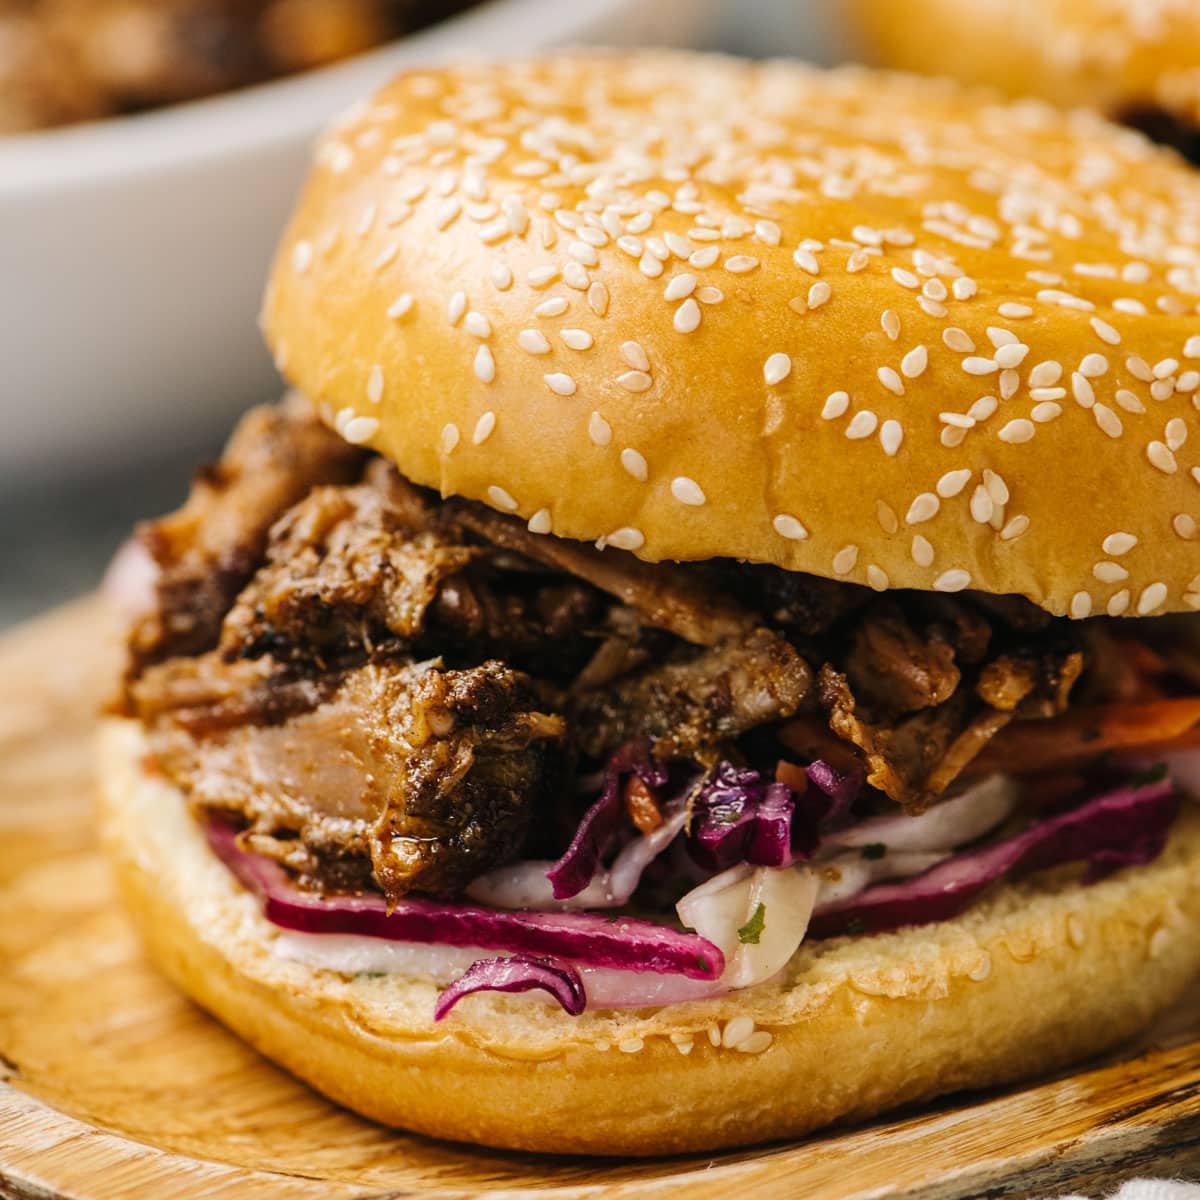 https://oursaltykitchen.com/wp-content/uploads/2017/05/oven-pulled-pork-featured-image.jpg